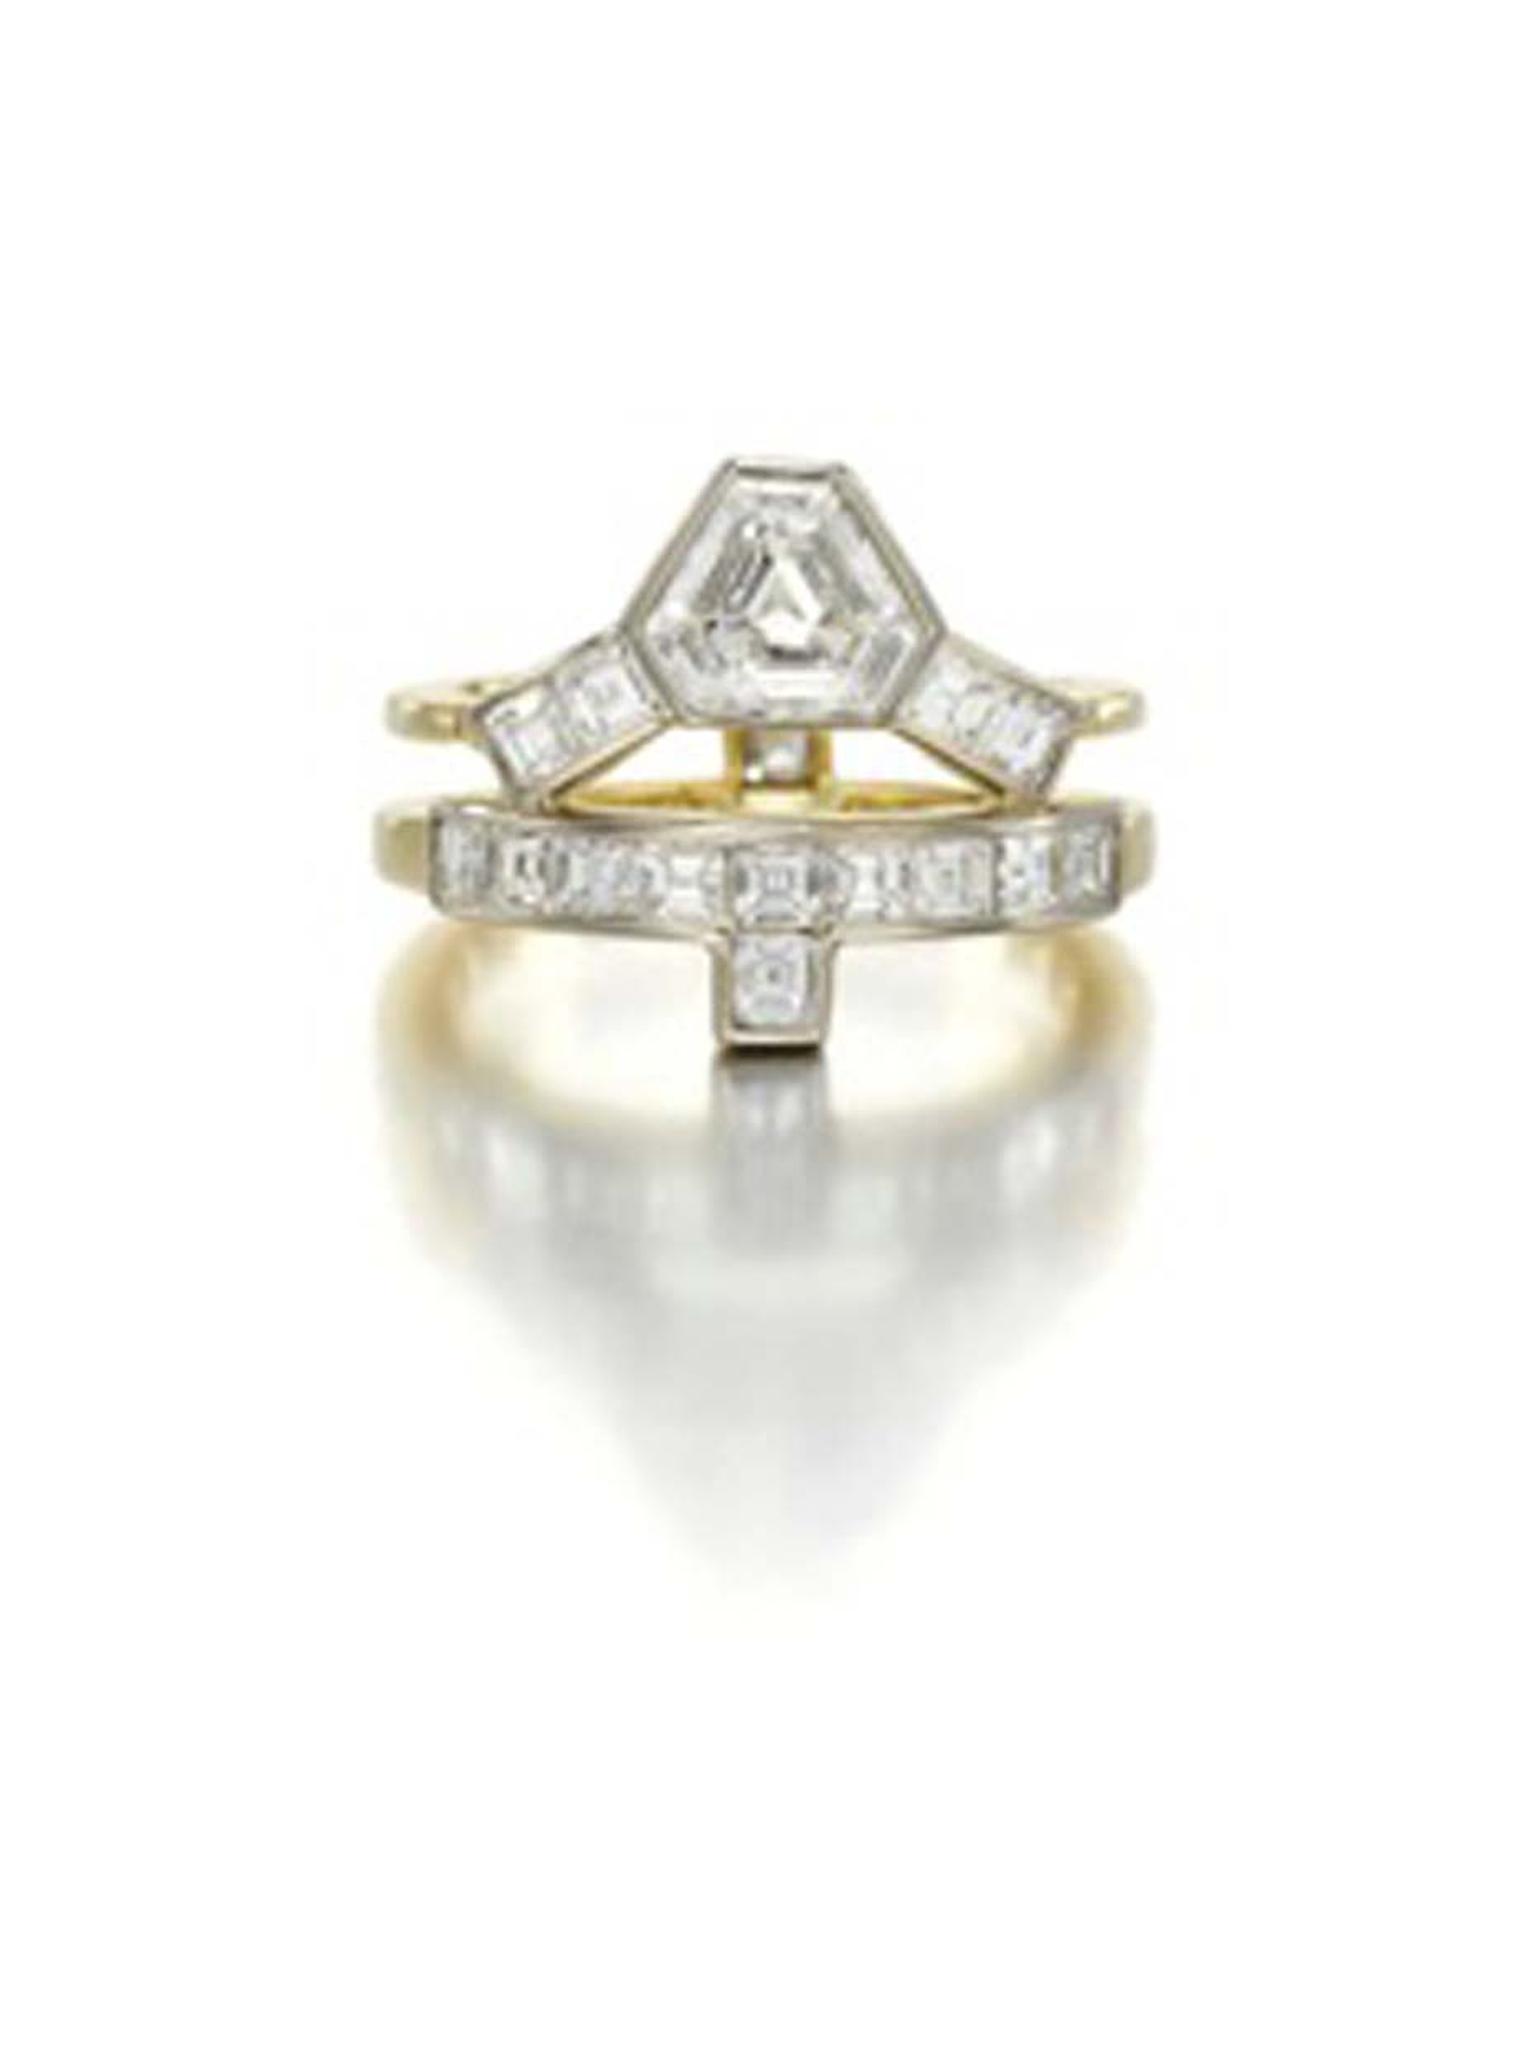 Jessica McCormack Tetris ring in white and yellow gold set with 2.46ct diamonds